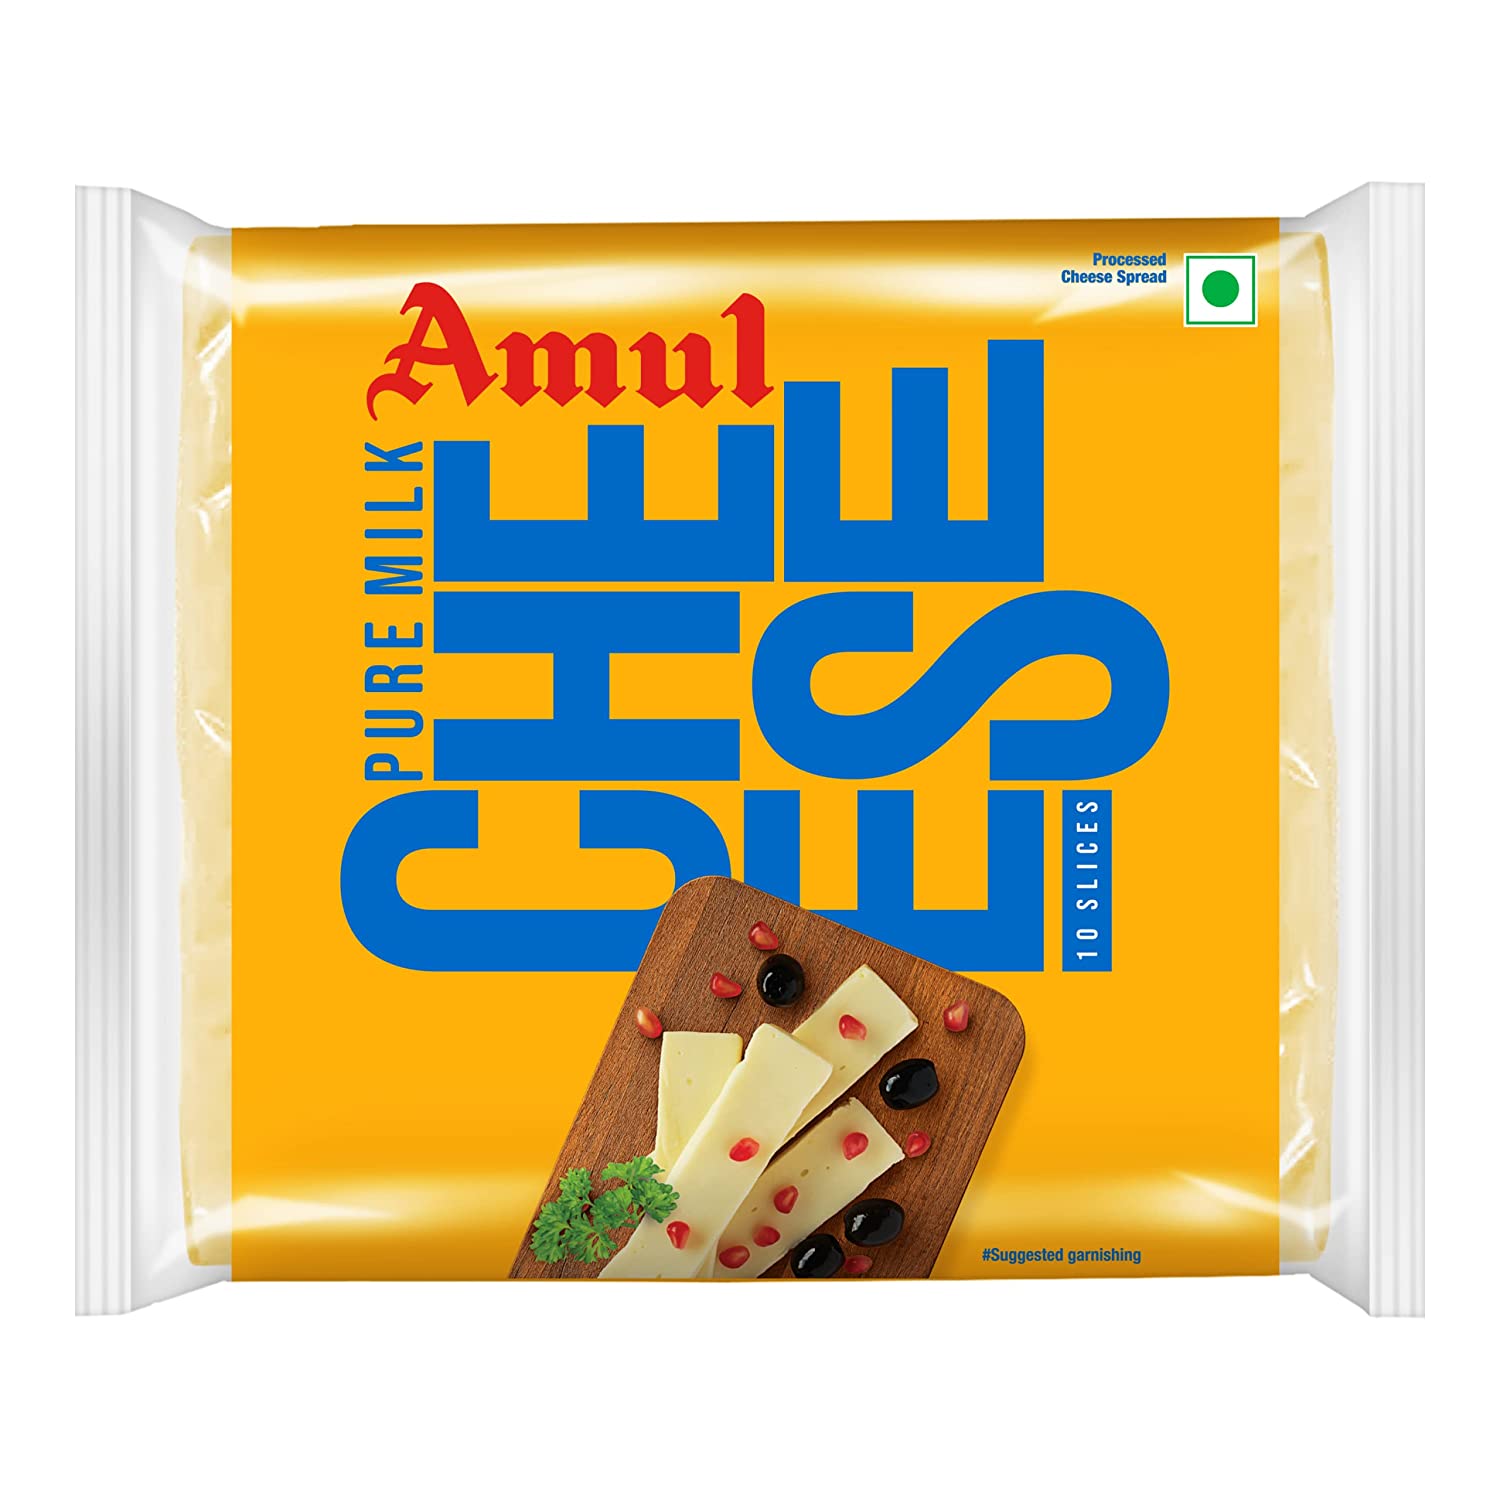 Amul Cheese - 10 Slices